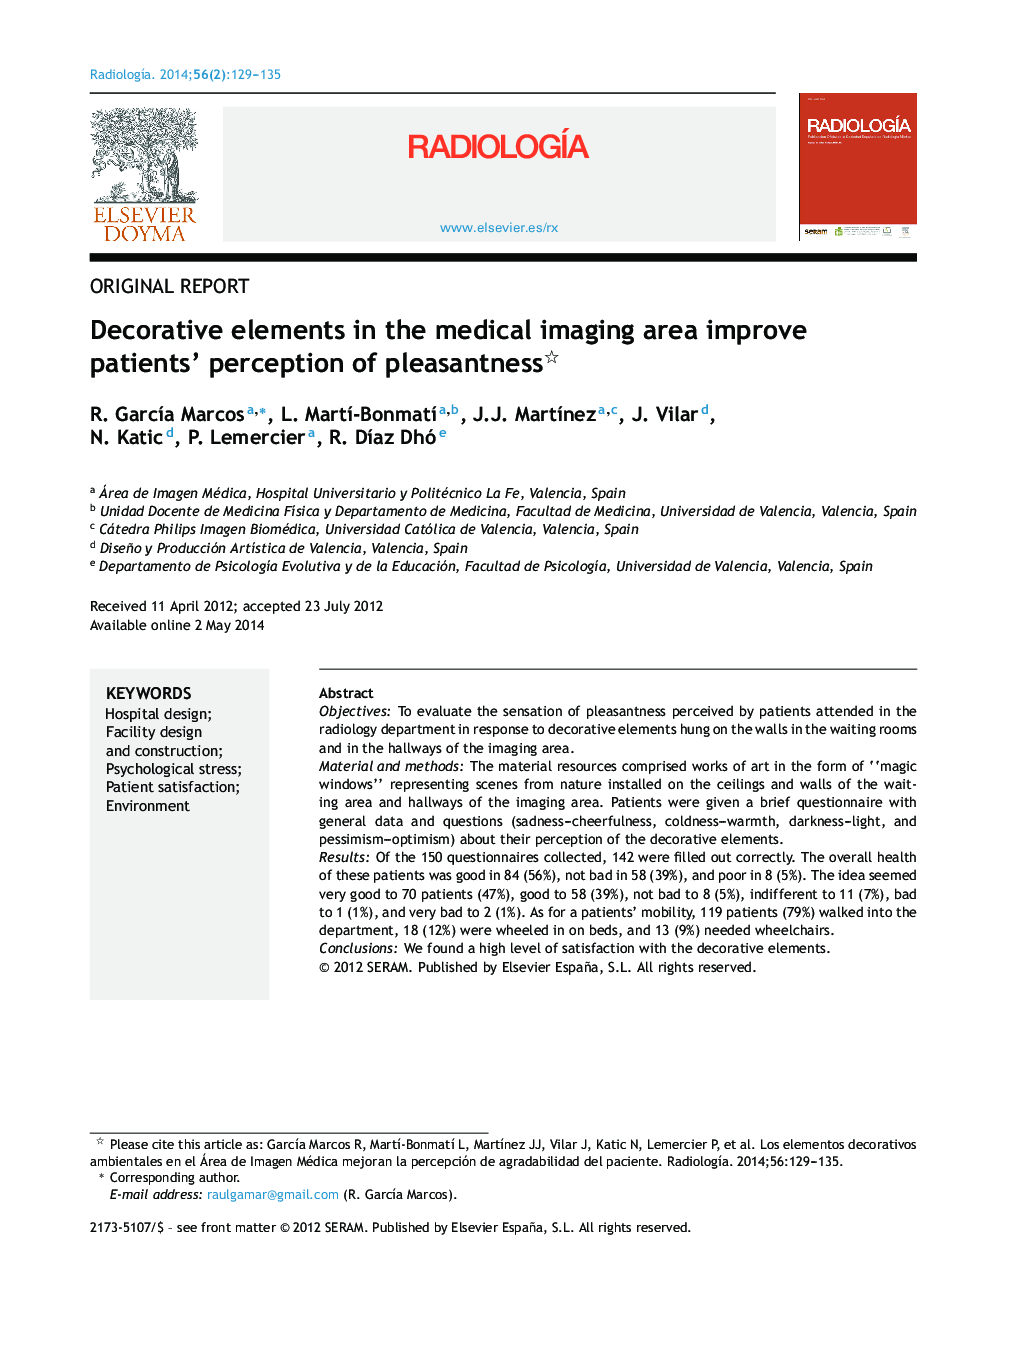 Decorative elements in the medical imaging area improve patients’ perception of pleasantness 